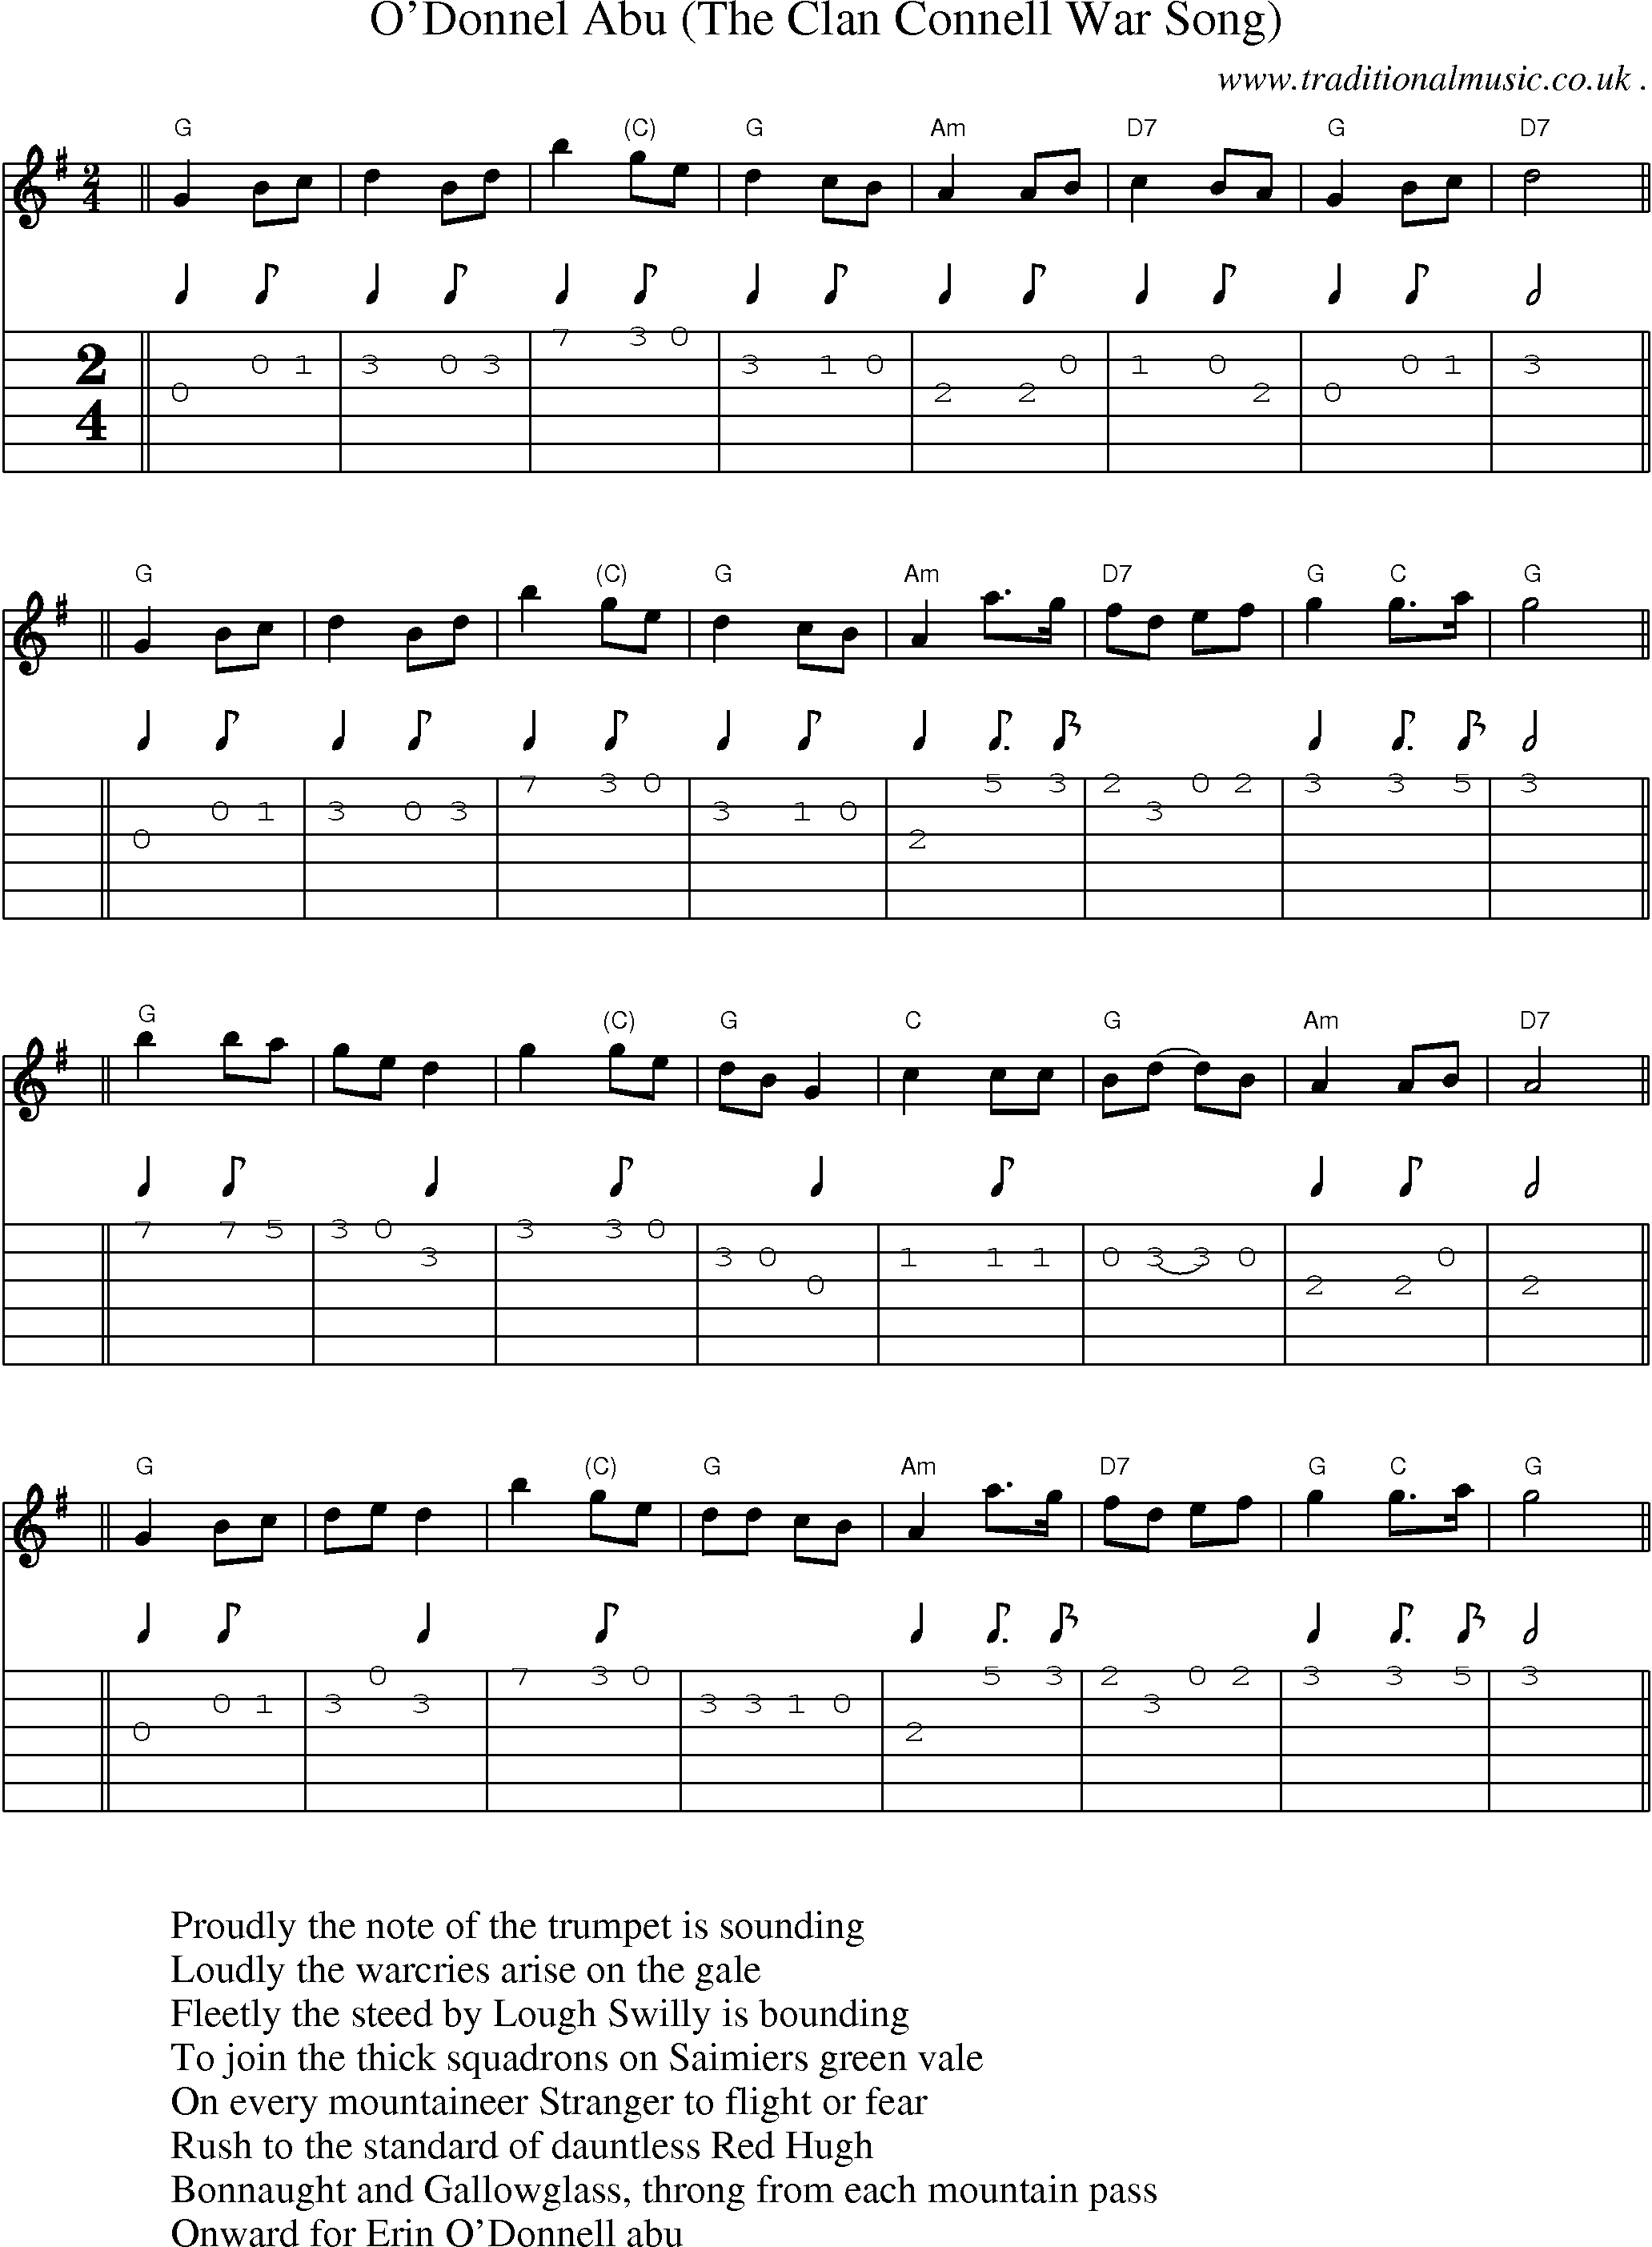 Sheet-Music and Guitar Tabs for Odonnel Abu (the Clan Connell War Song)